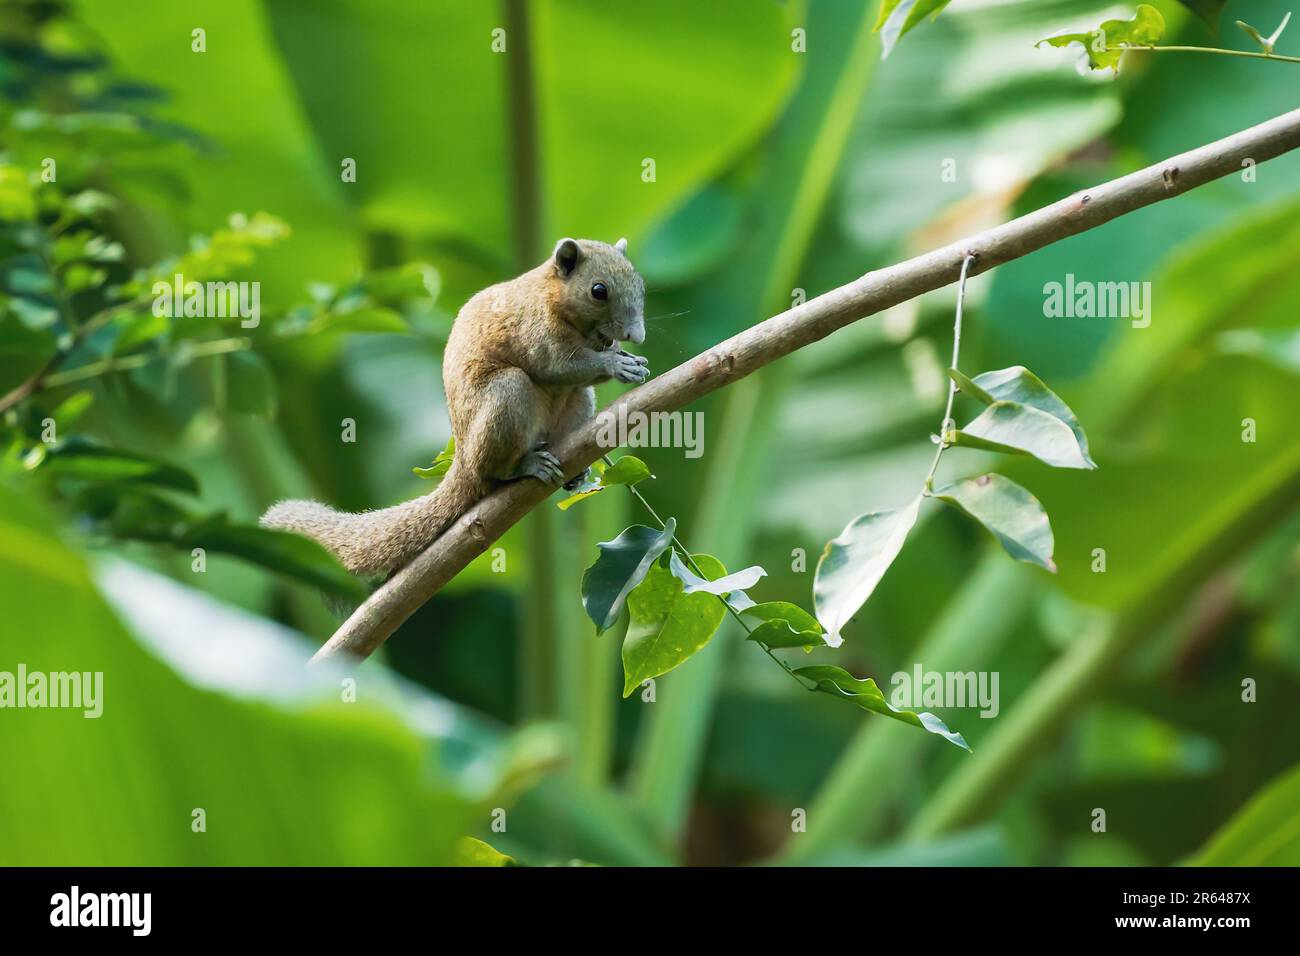 Happy looking Grey-bellied squirrel on a branch, Callosciurus caniceps, in a banana plantation, Thailand Stock Photo